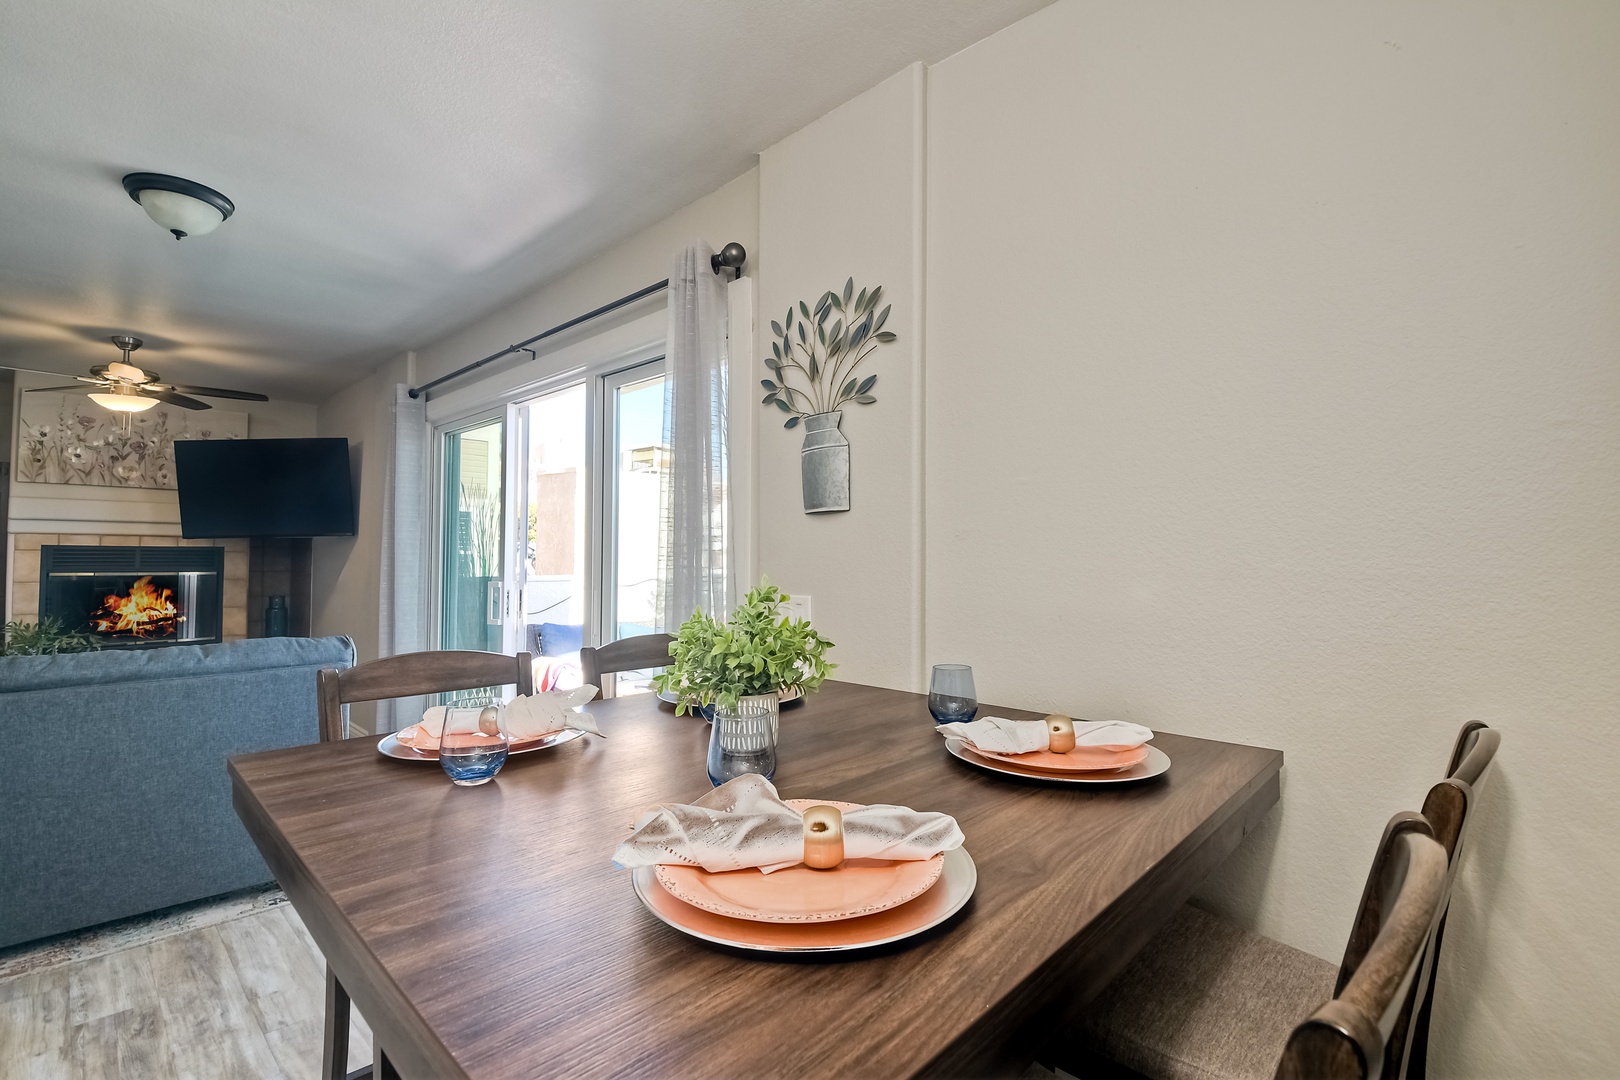 Gather family around the dining table, with seating for 4